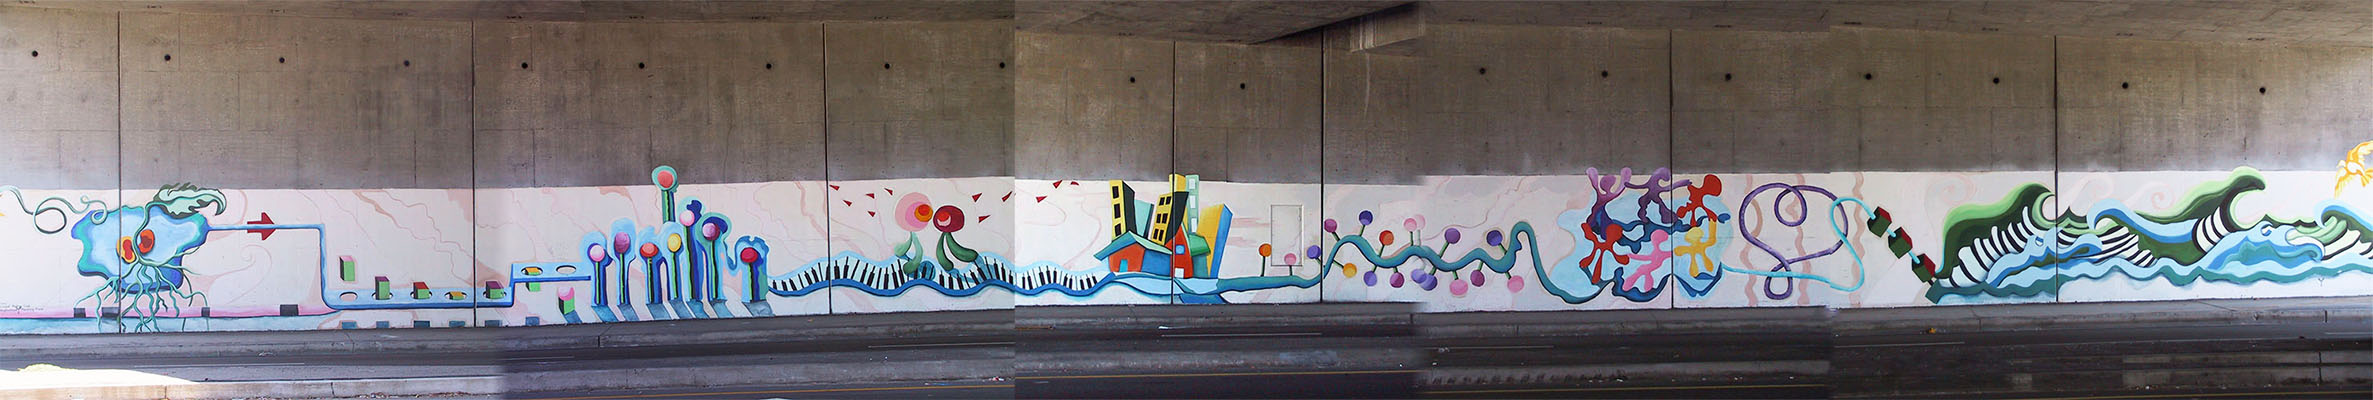 Journey of Life underpass mural completed